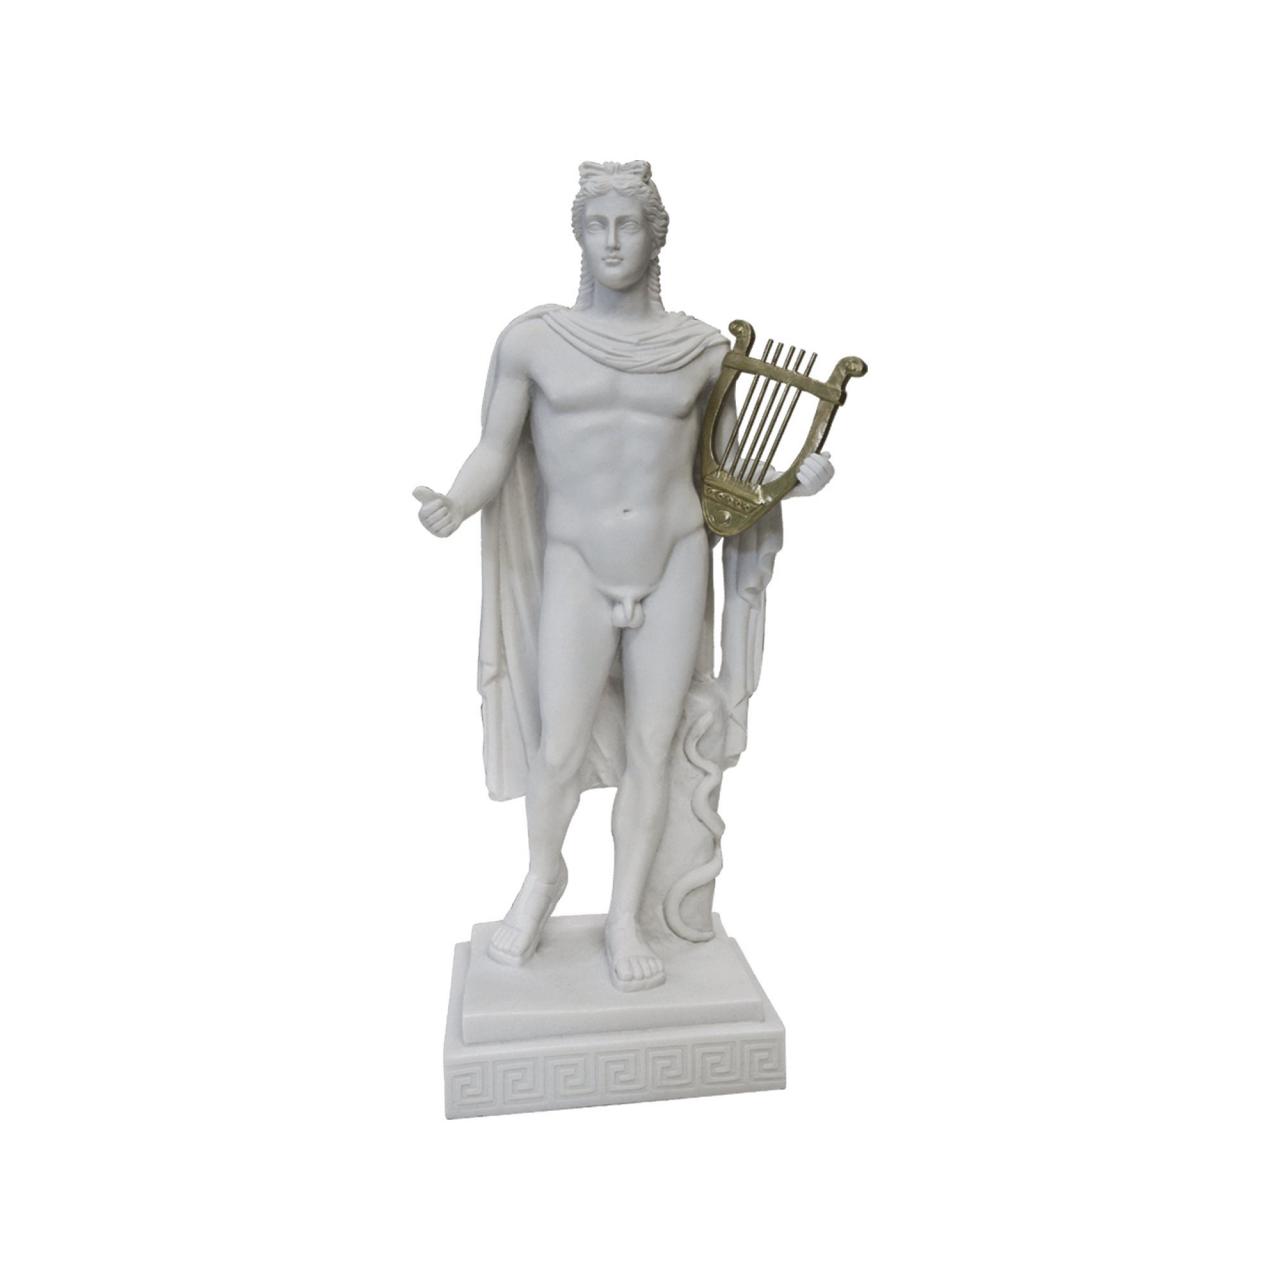 Apollo, the Greek god of manifold function and meaning